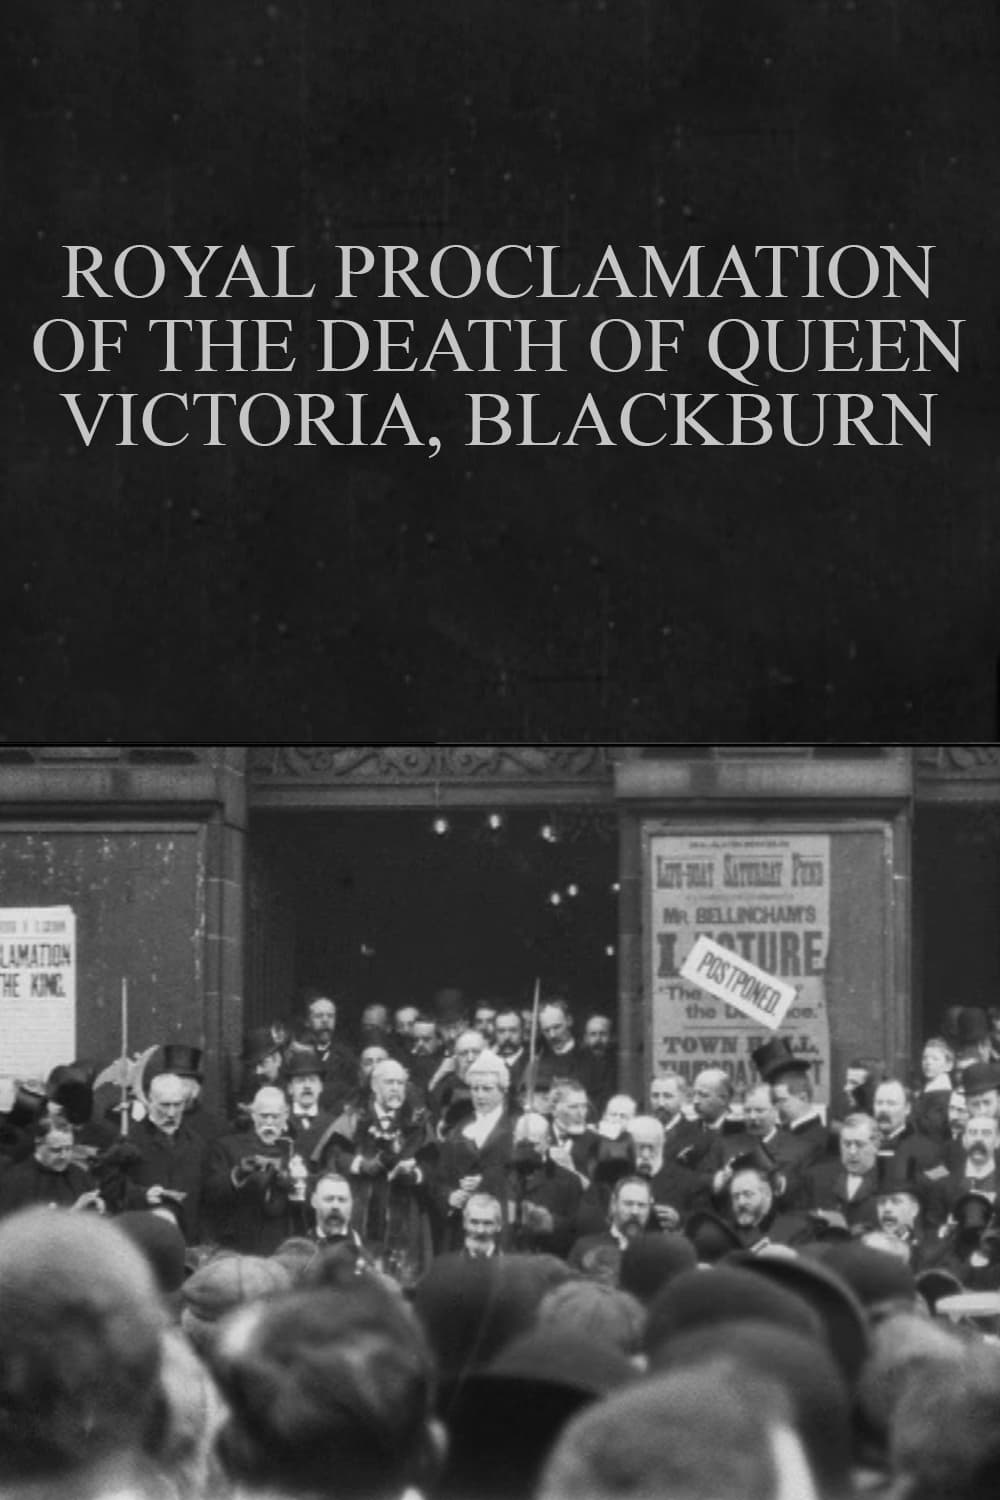 Royal Proclamation of the Death of Queen Victoria, Blackburn